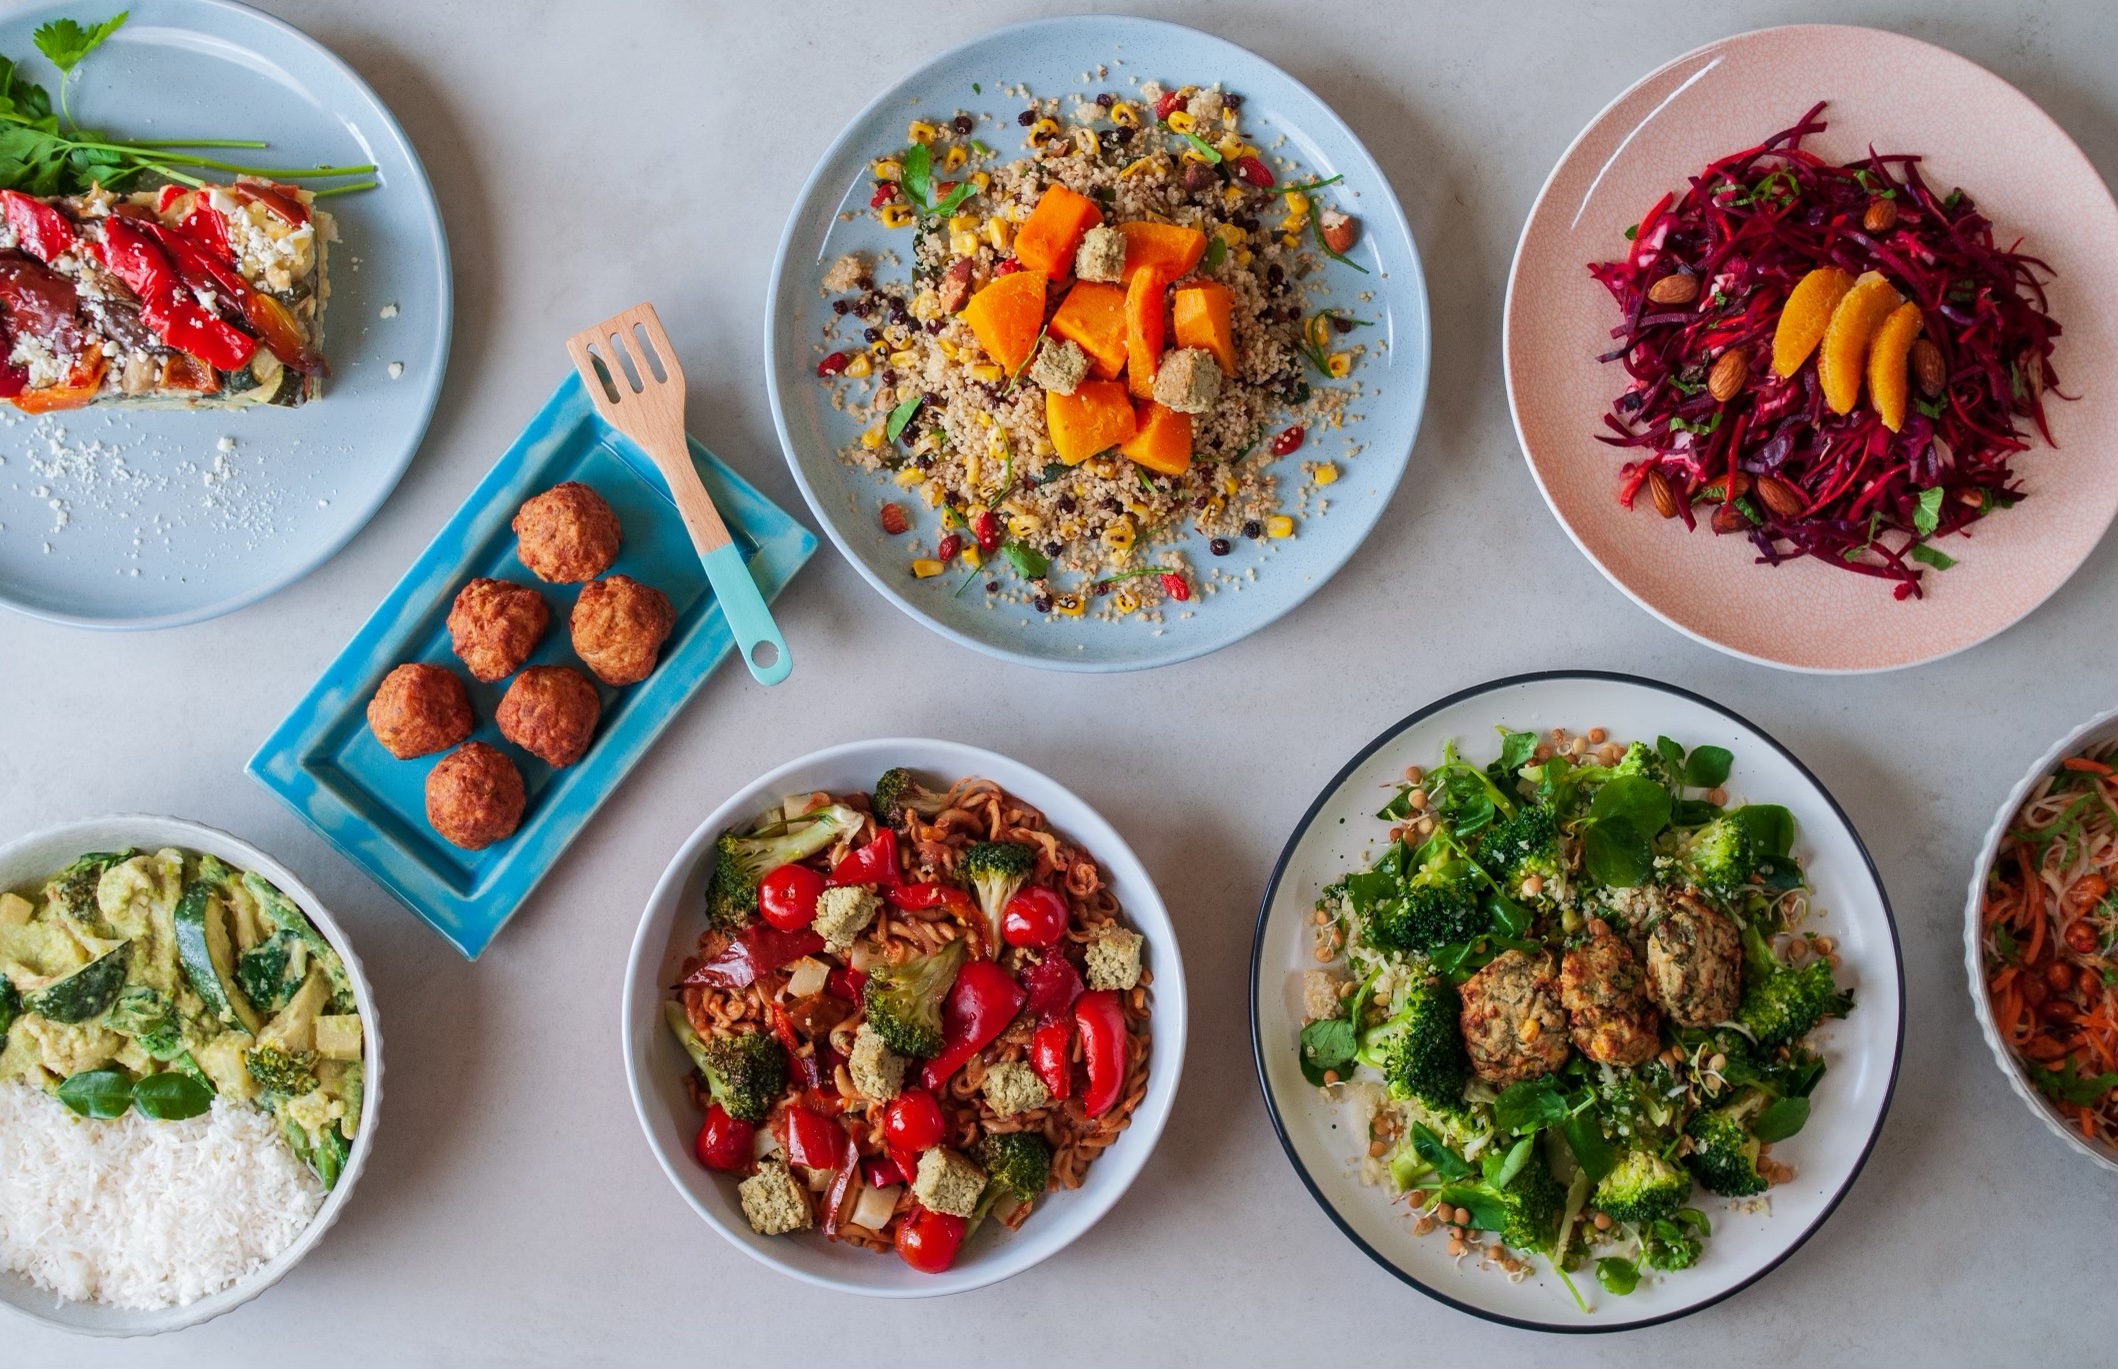 WIN healthy lunches and dinners for a week For You and A Friend Thanks to Eatwell!